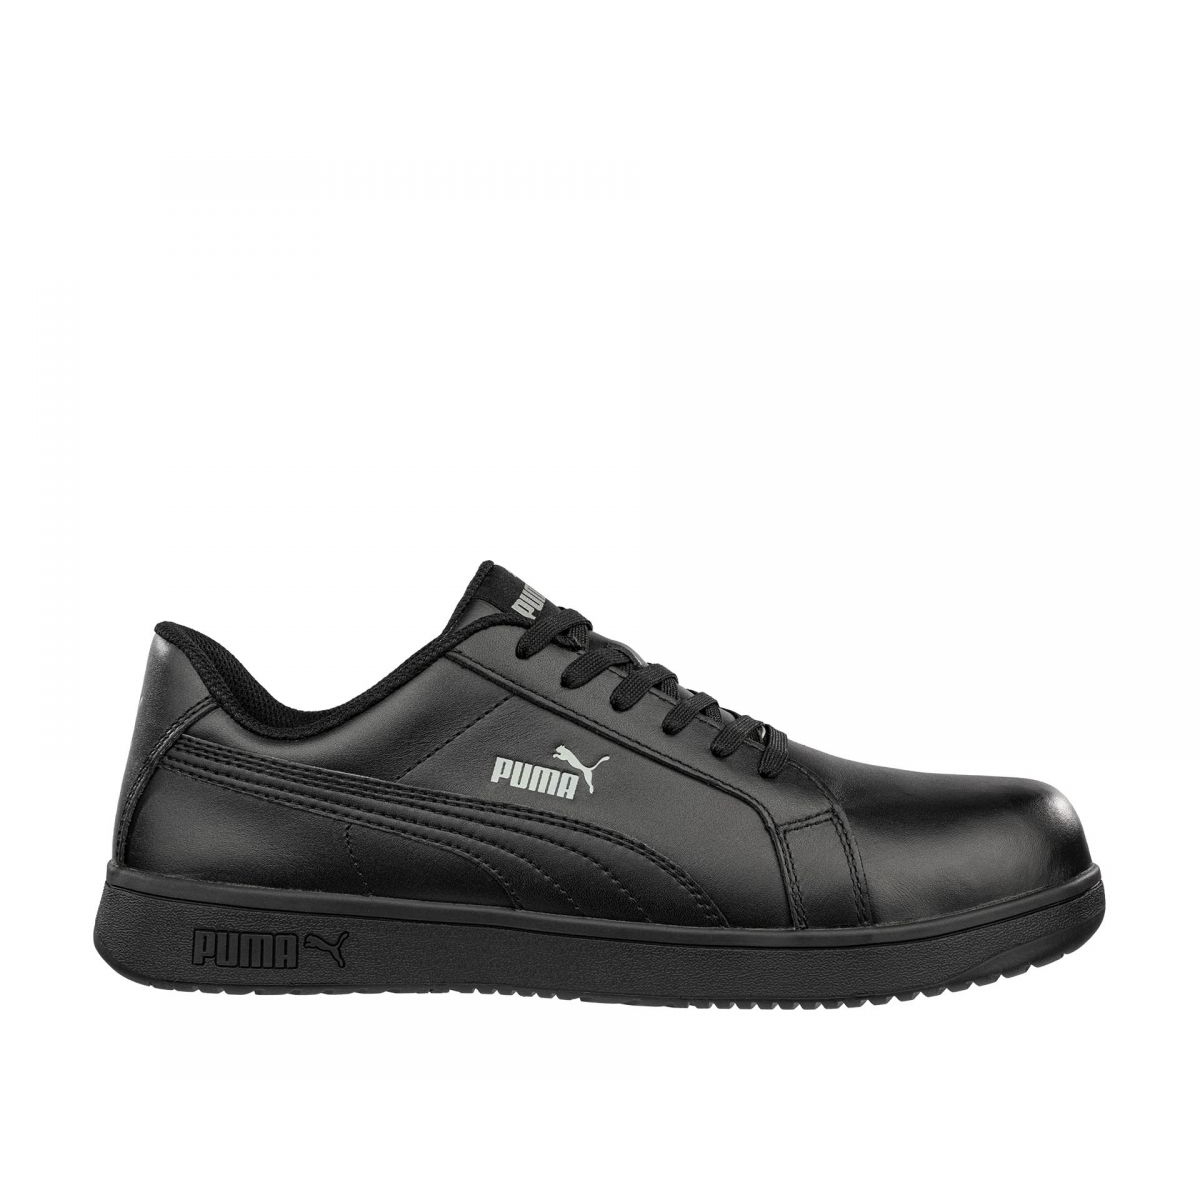 PUMA Safety Women's Iconic Low Composite Toe SD Work Shoes Smooth Black Leather - 640105 BLACK - BLACK, 7